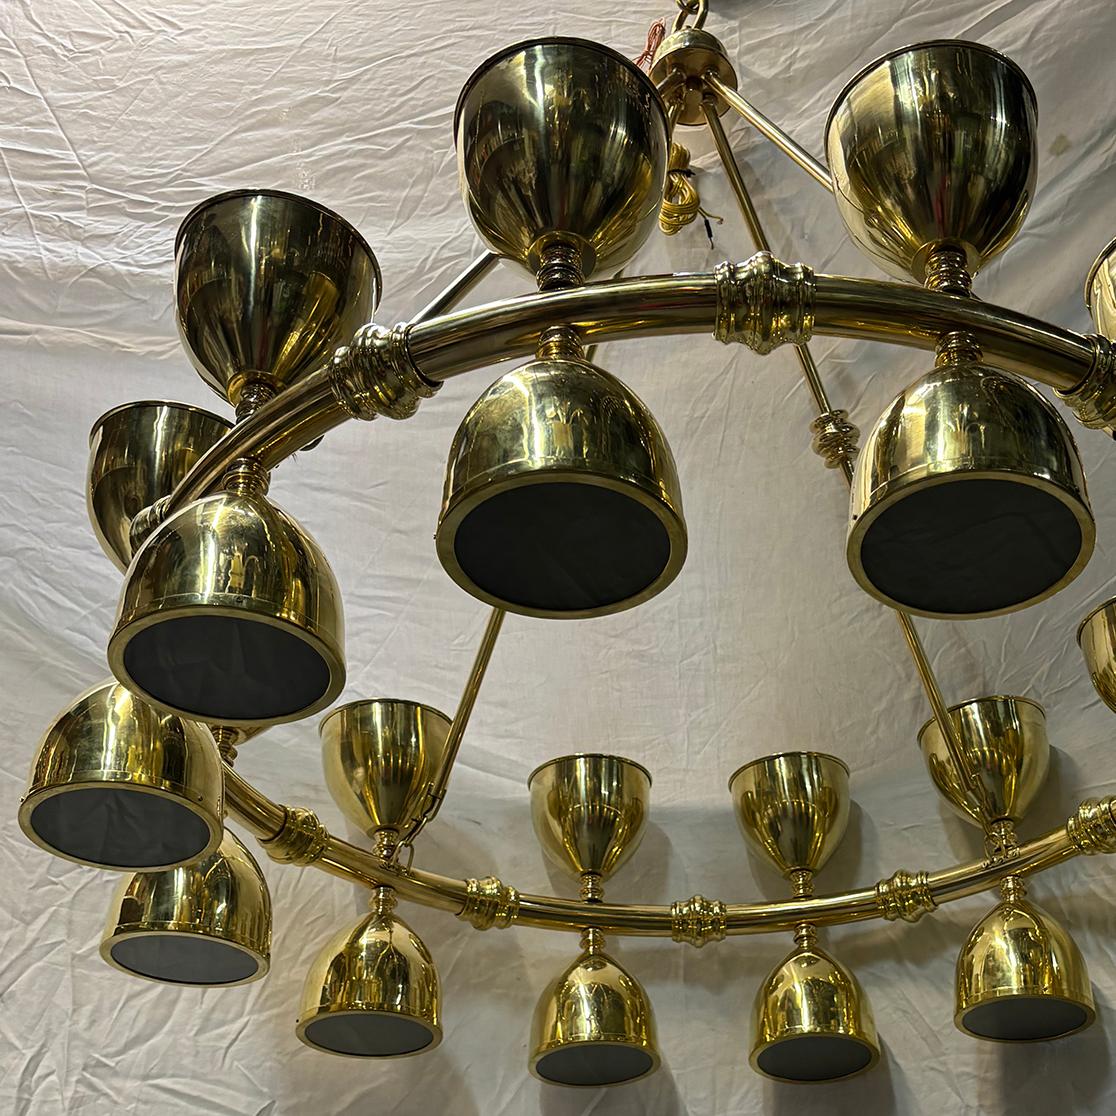 A Large Midcentury Brass Chandelier In Good Condition For Sale In New York, NY